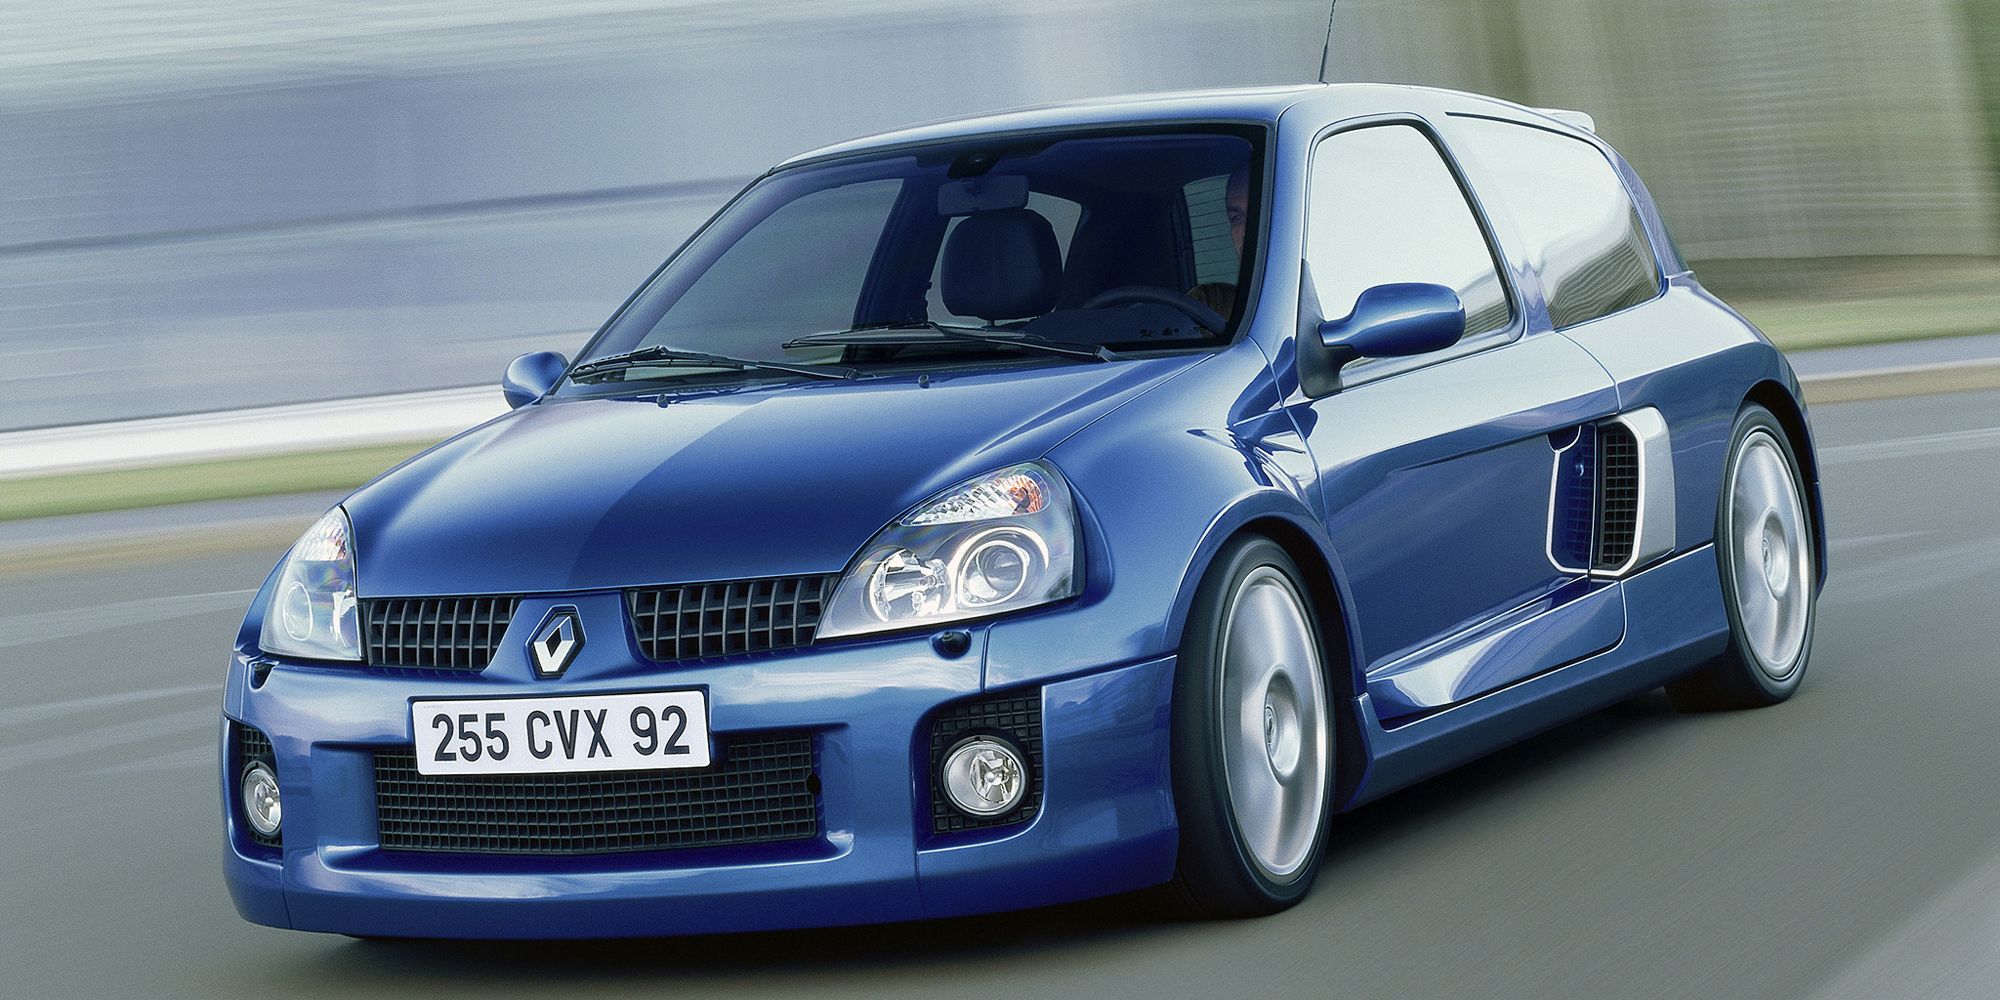 The front of the Clio V6 on the move